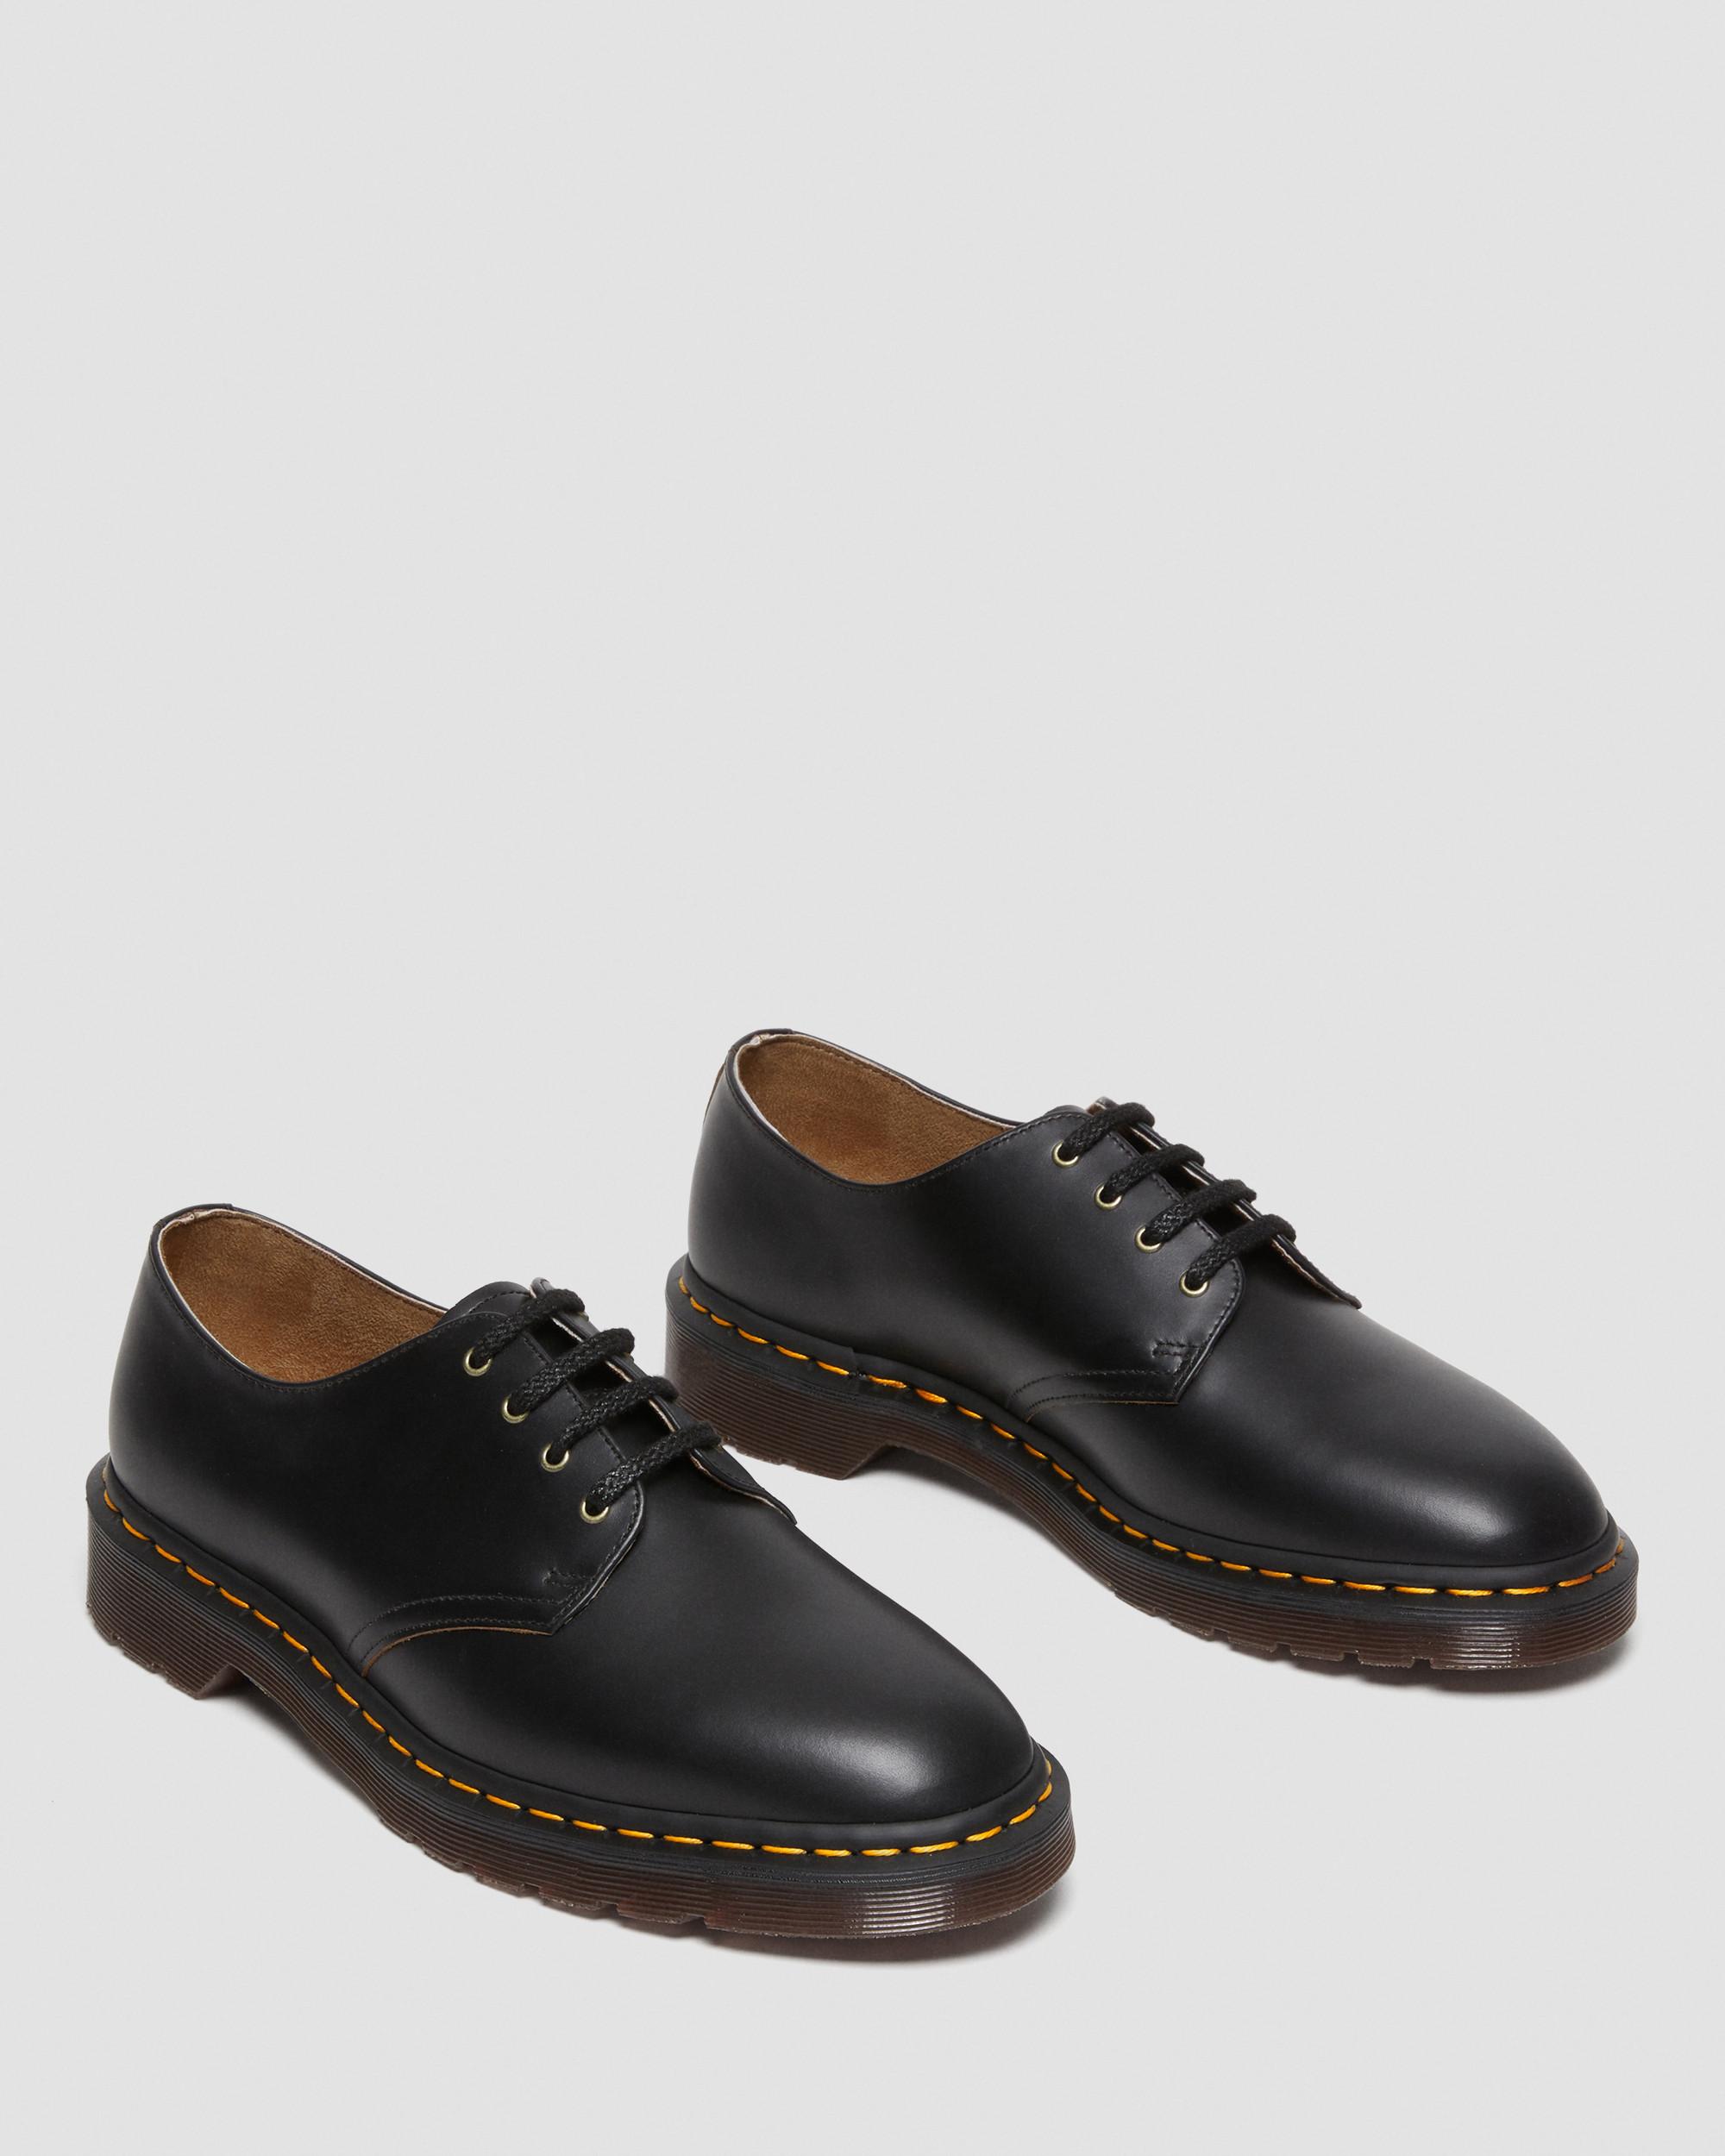 Smiths Vintage Smooth Leather Dress Boots | Dr. Martens